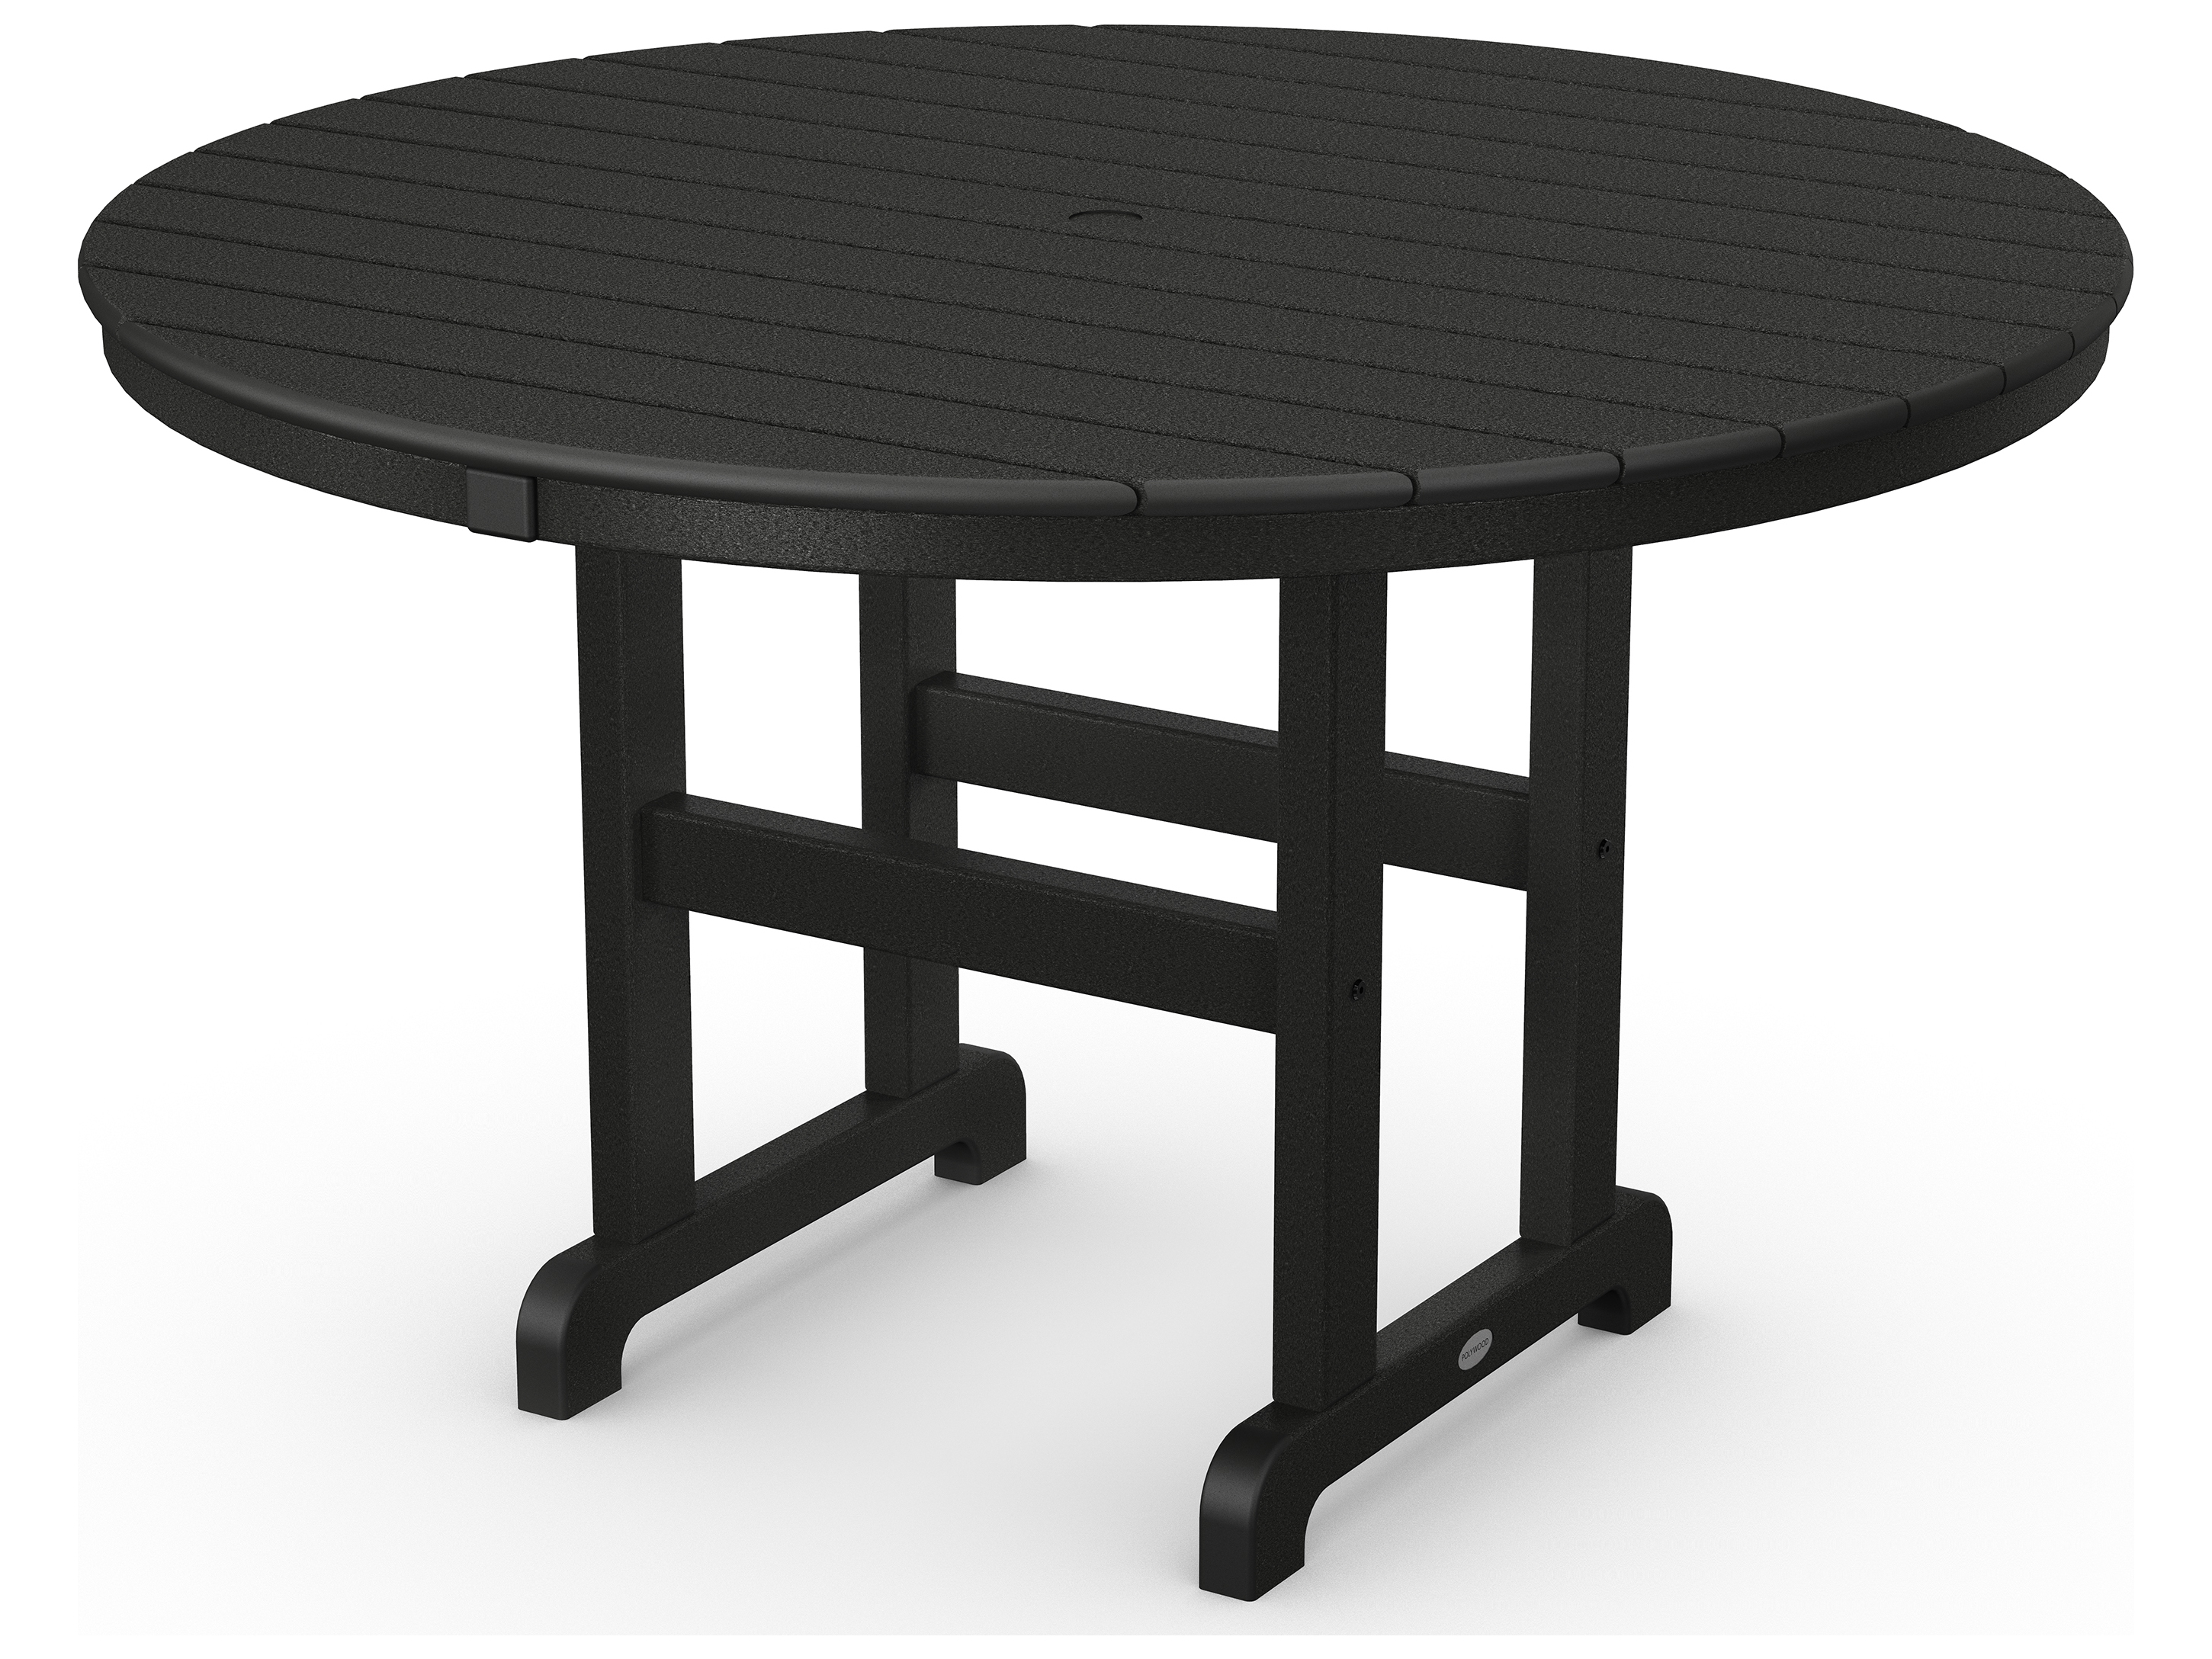 Polywood La Casa Cafe Recycled Plastic, Polywood Dining Table